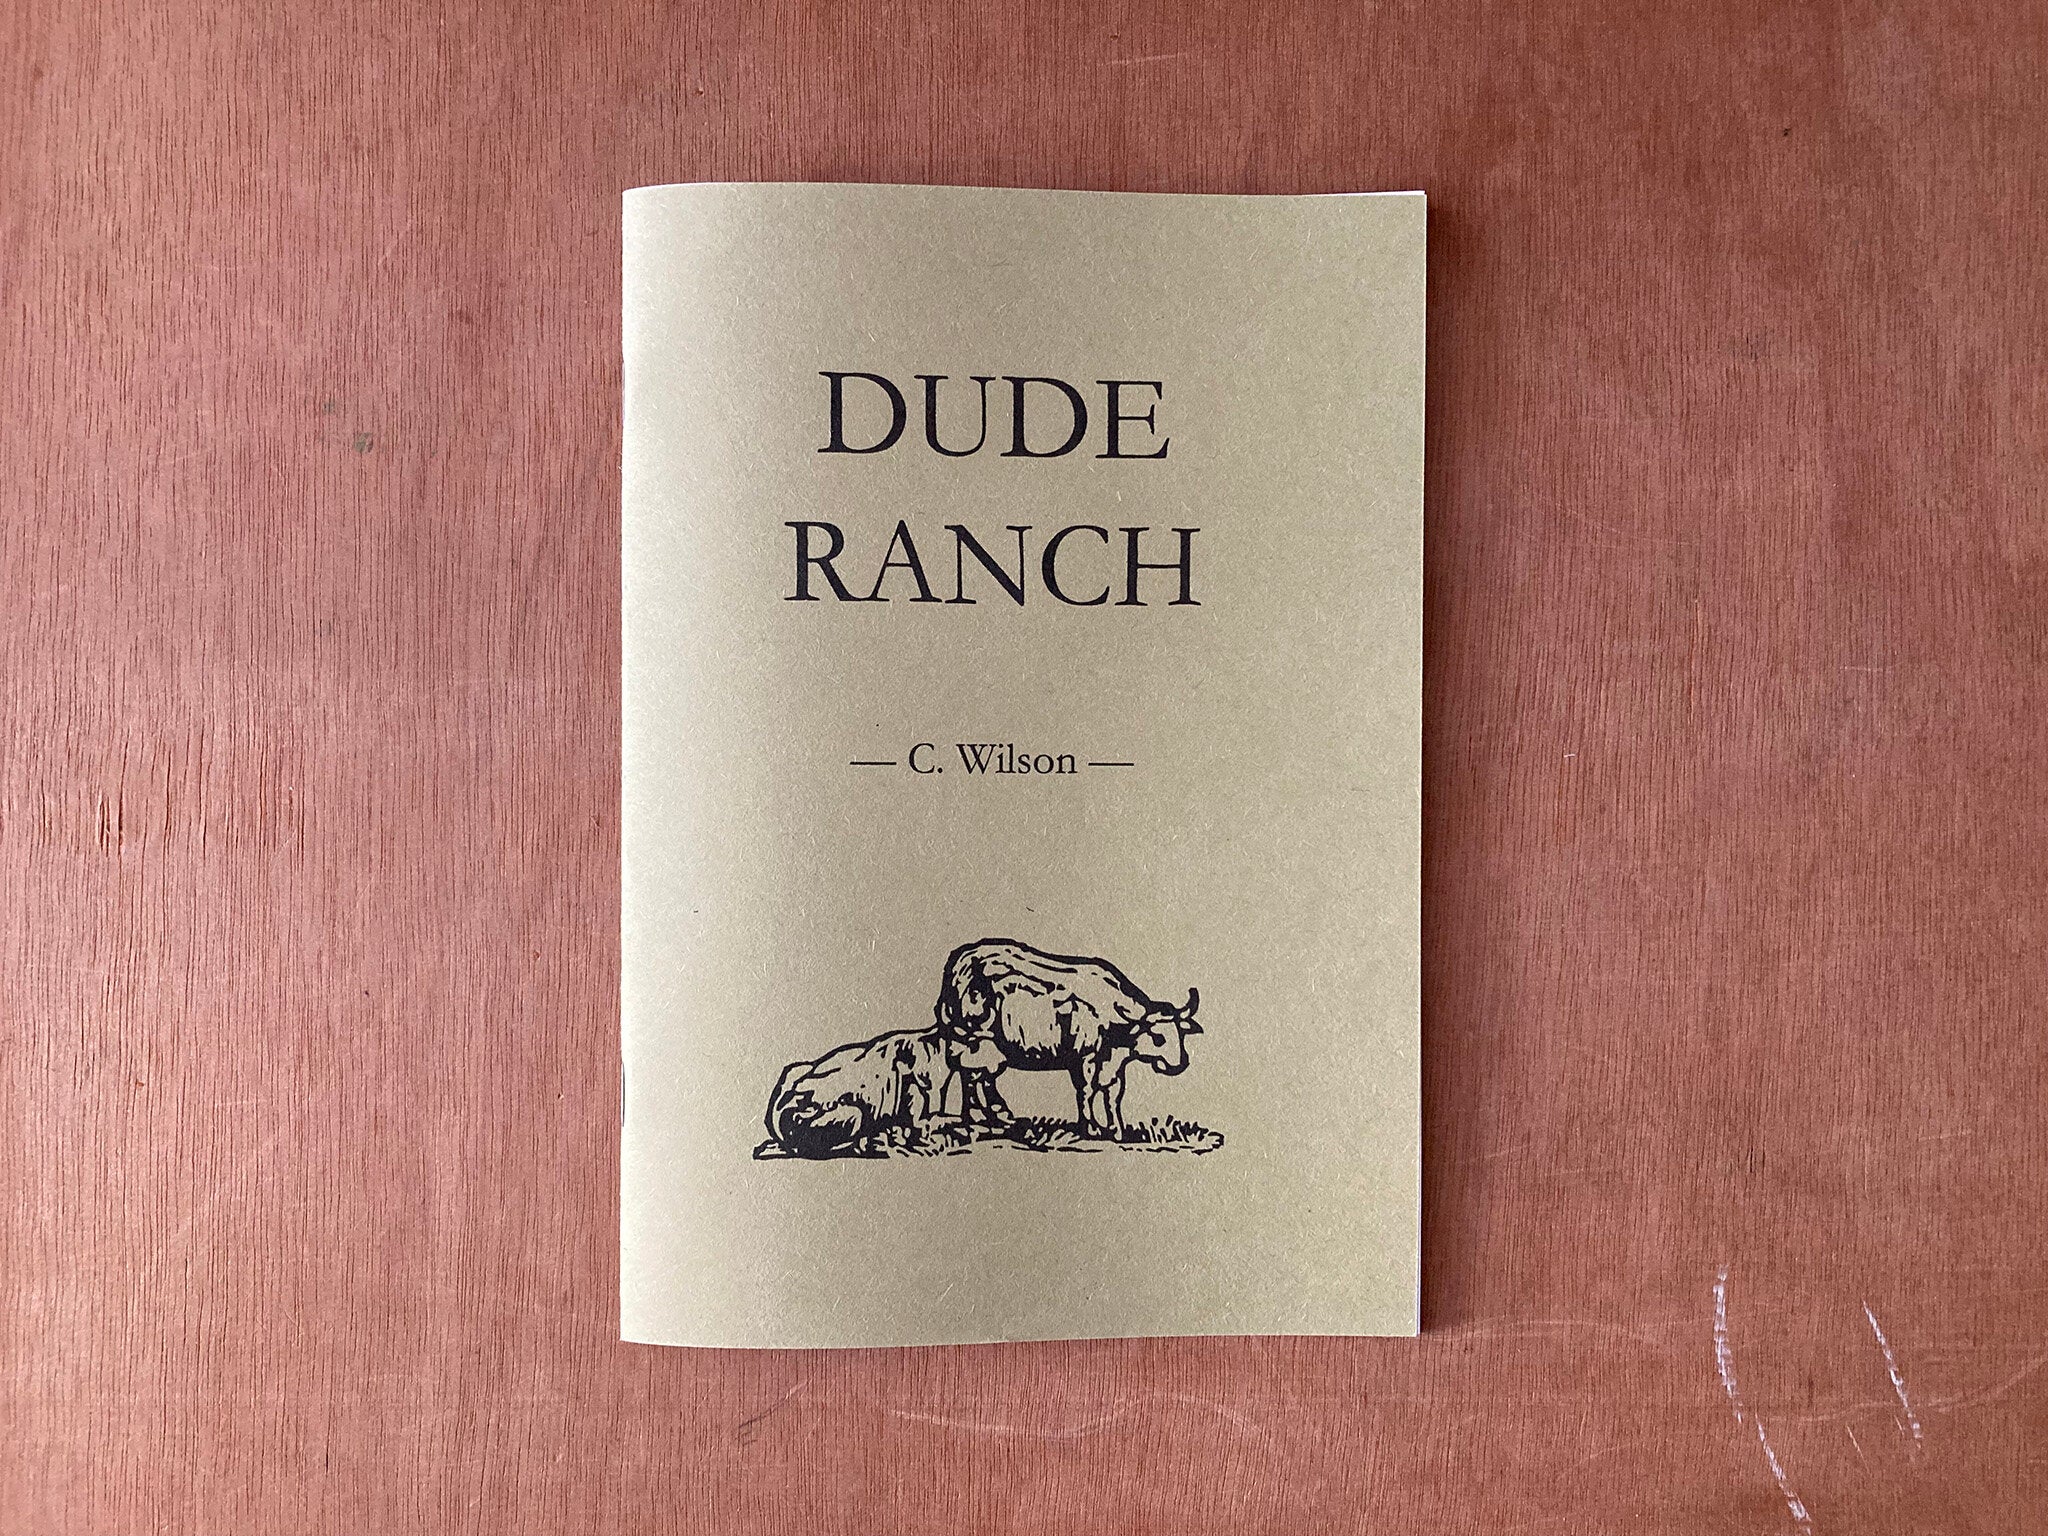 DUDE RANCH by C. Wilson